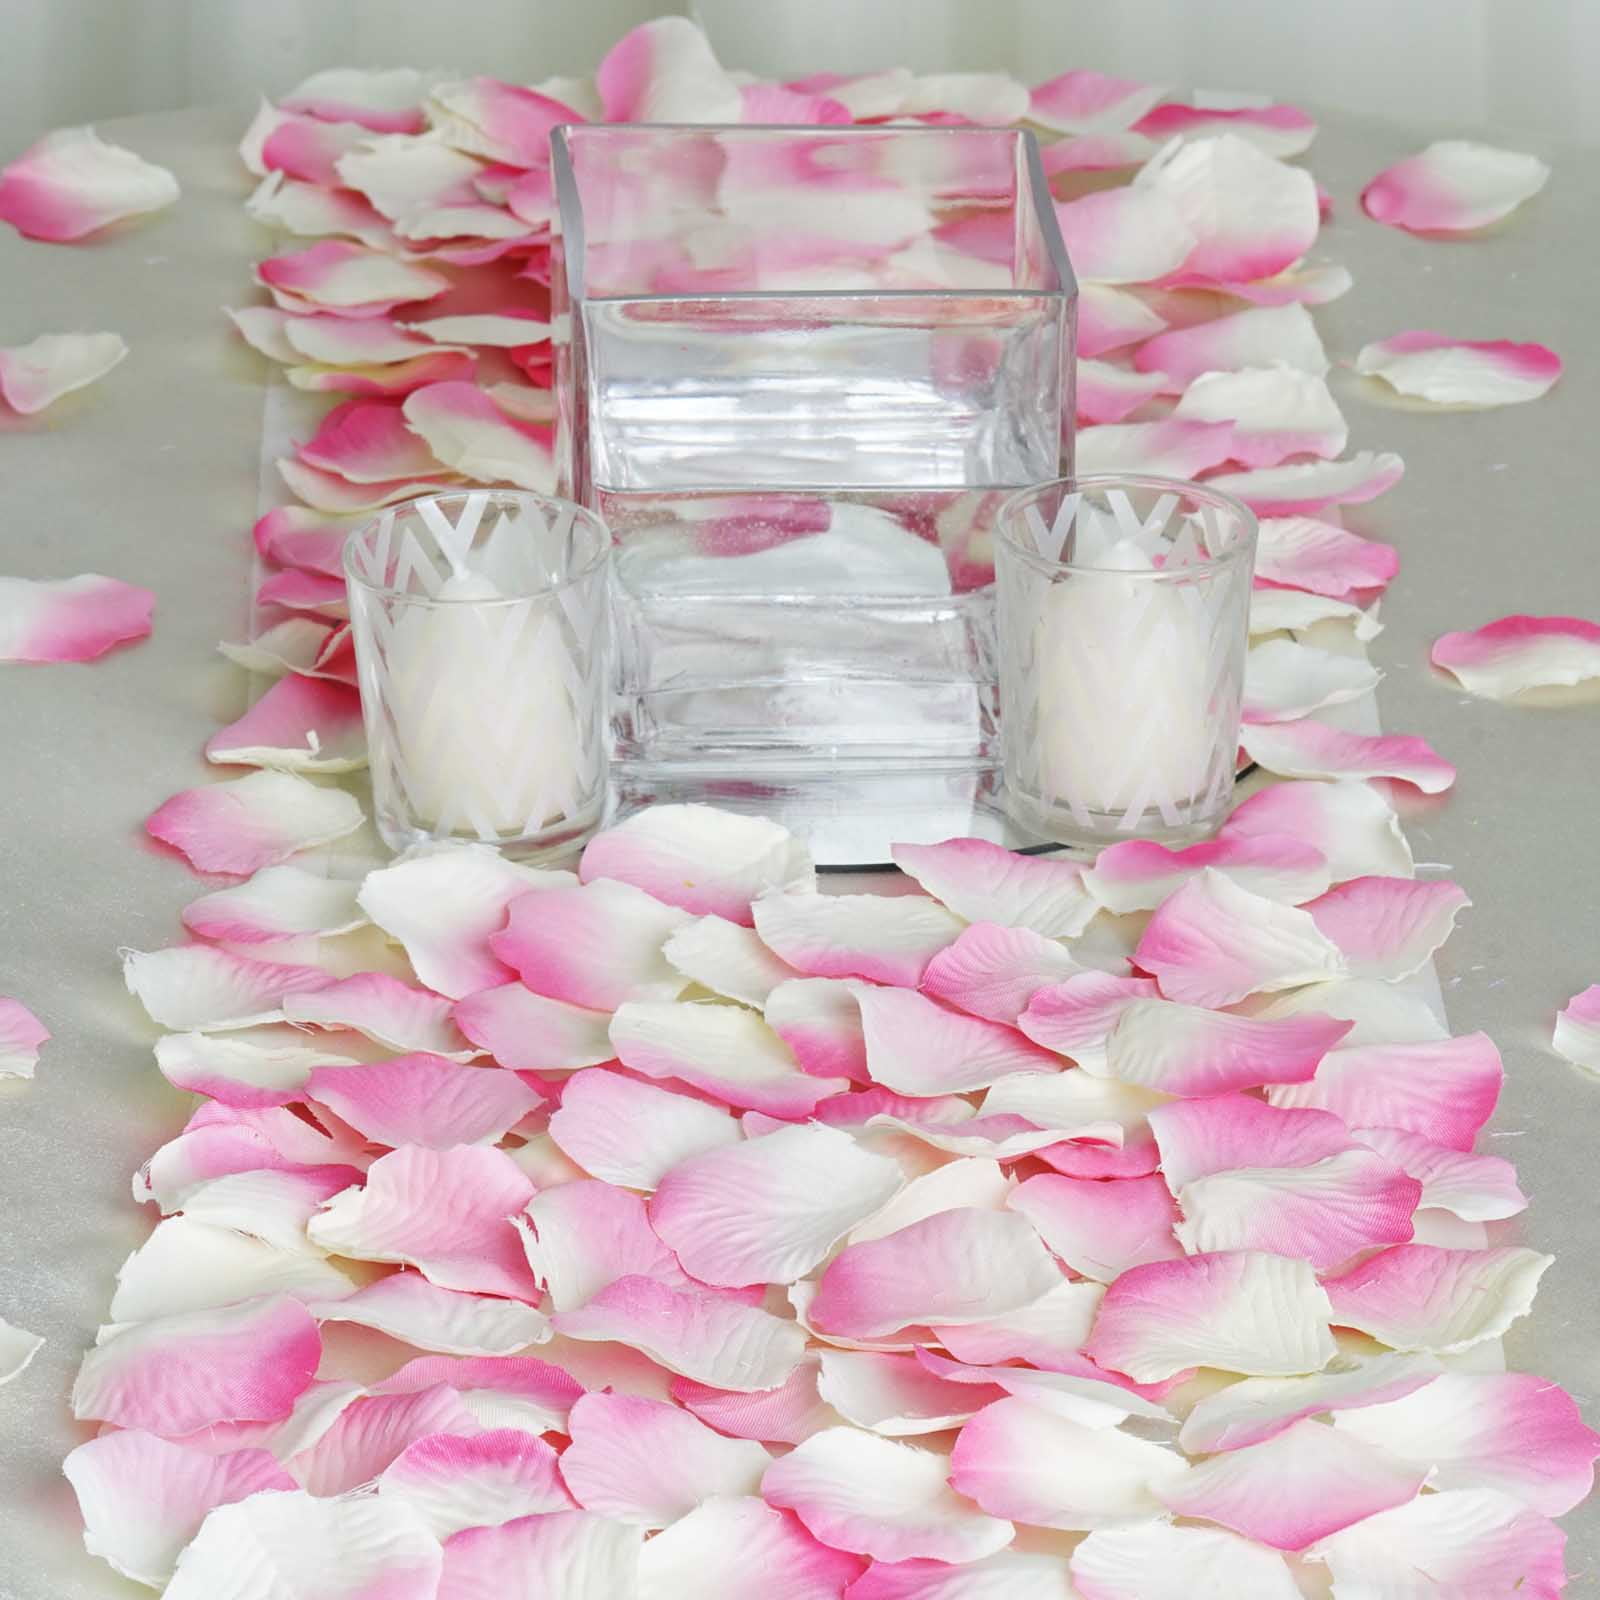 IVORY SILK ROSE PETALS FLOWER TABLE DECORATION CONFETTI WEDDING PARTY 